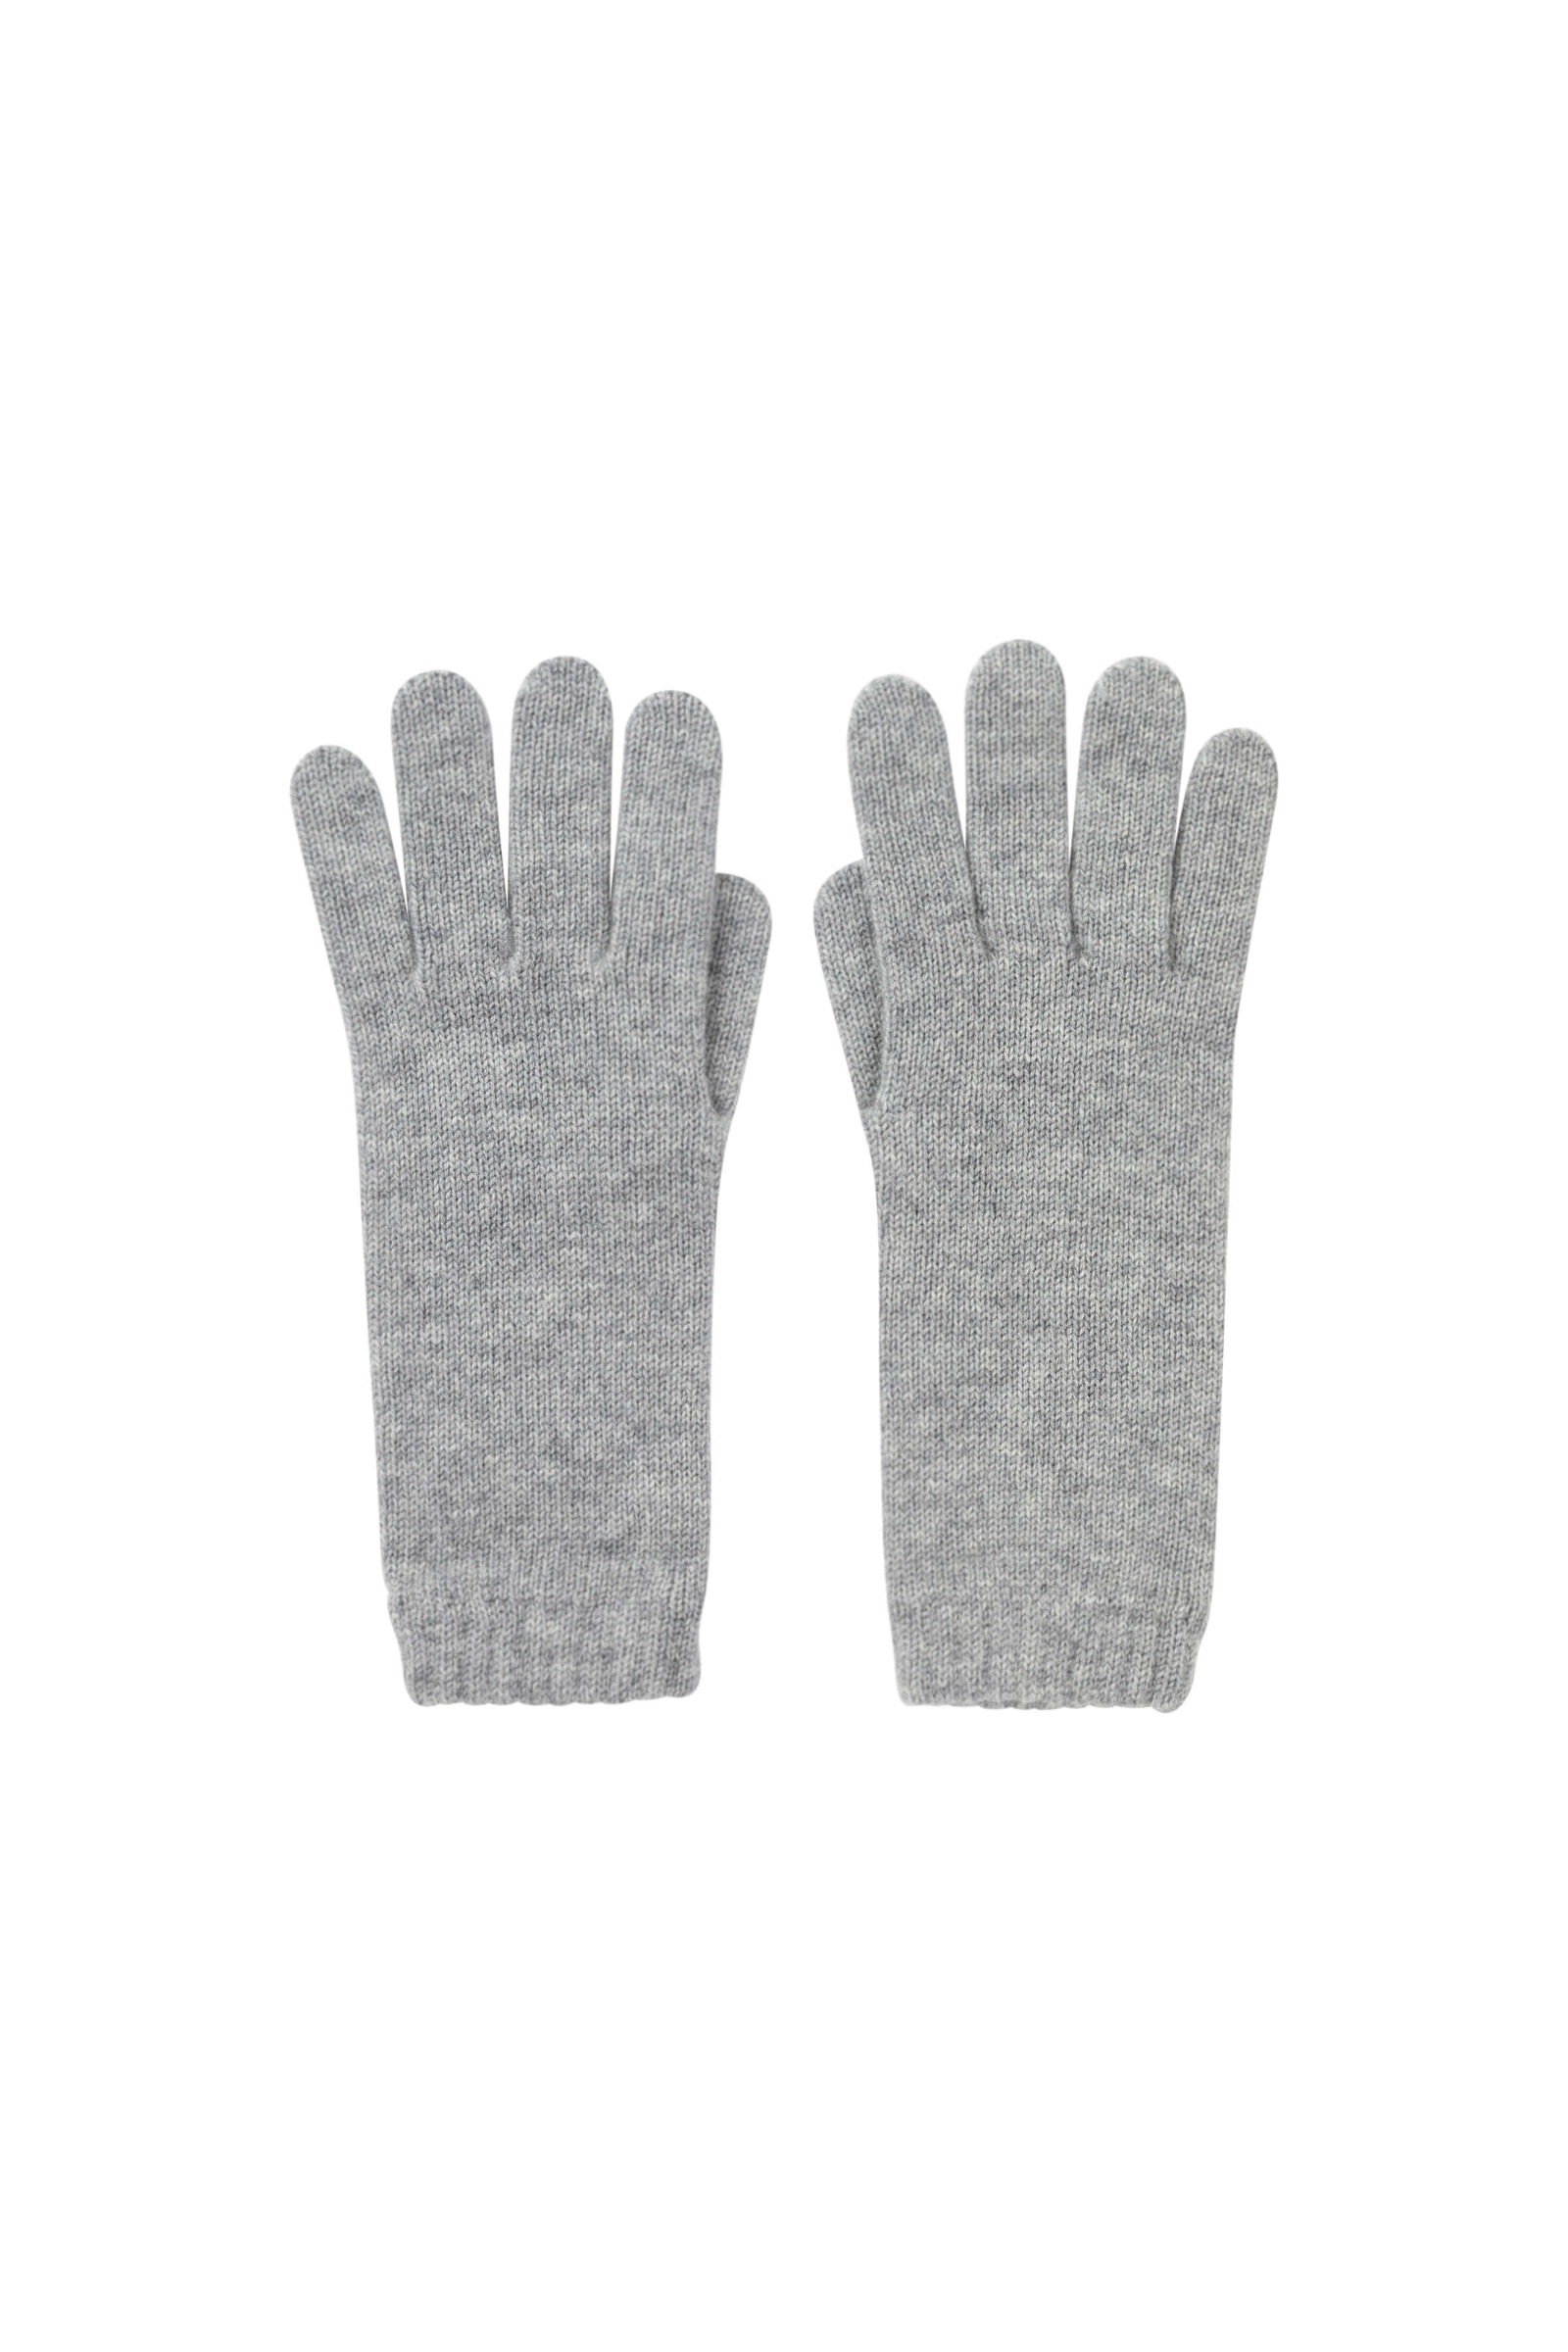 Johnstons of Elgin Womens Cashmere Gloves in Silver Womens Accessories Gloves Metallic 